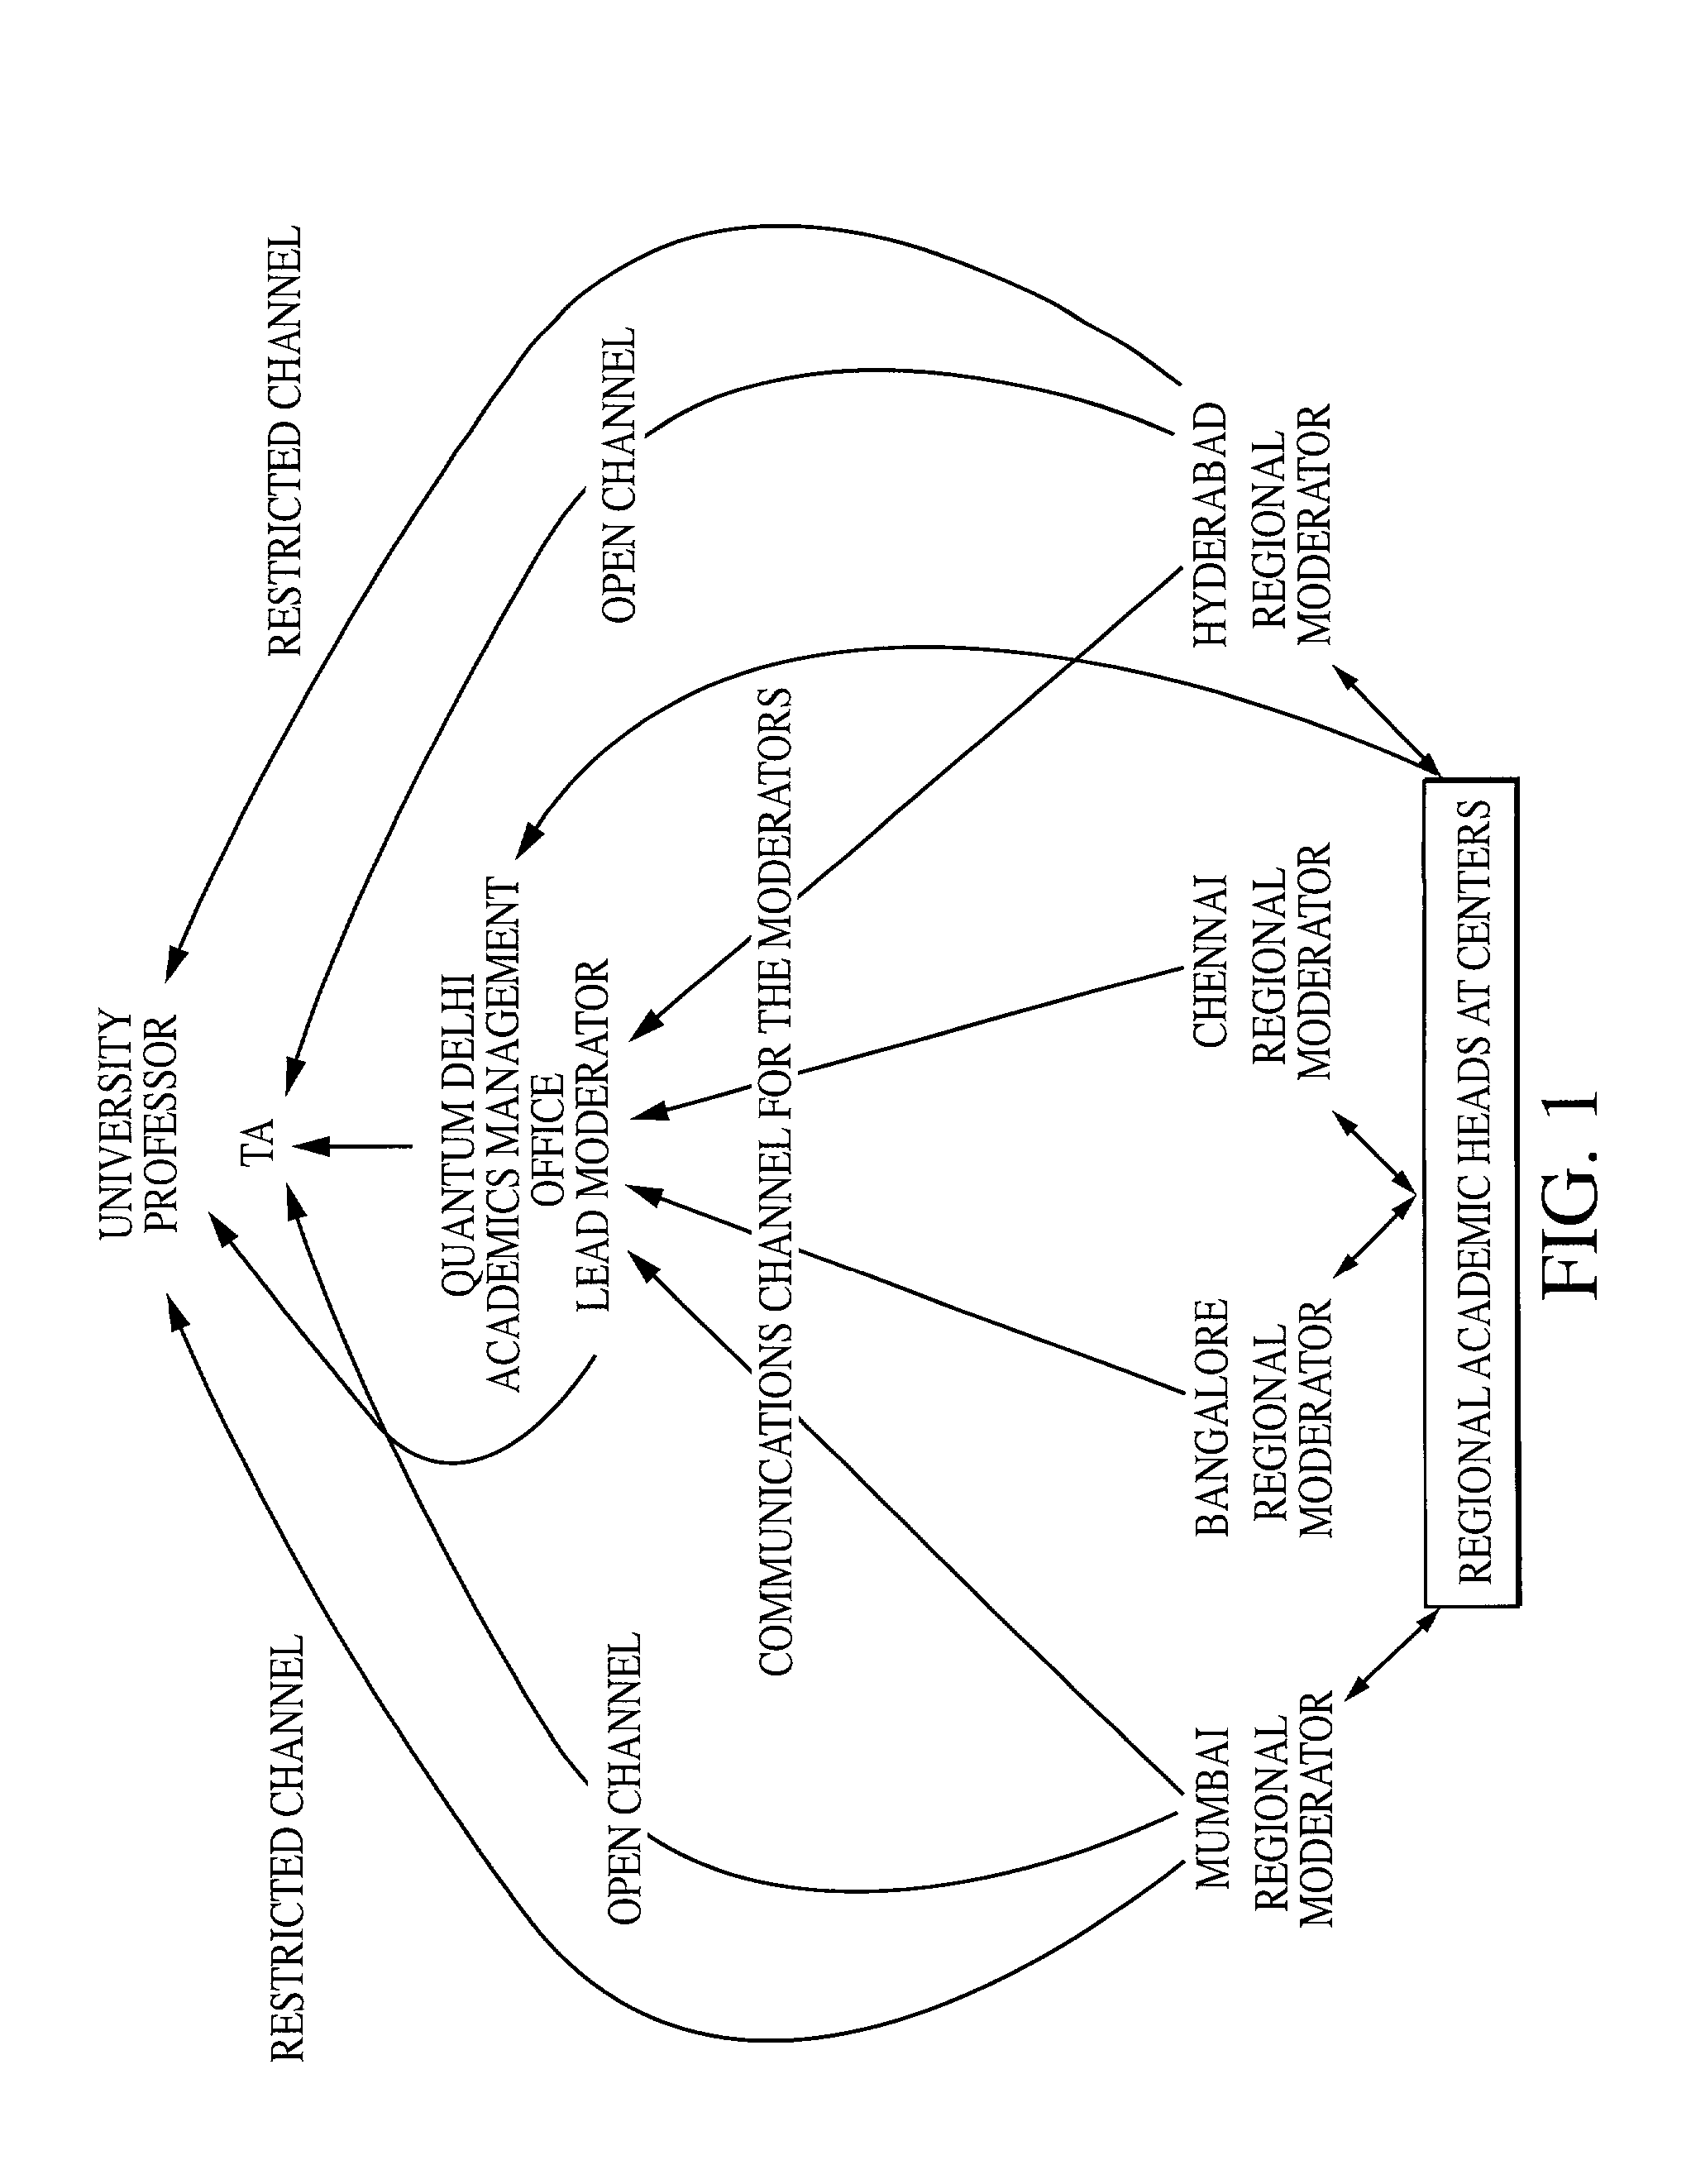 Method for imparting knowledge